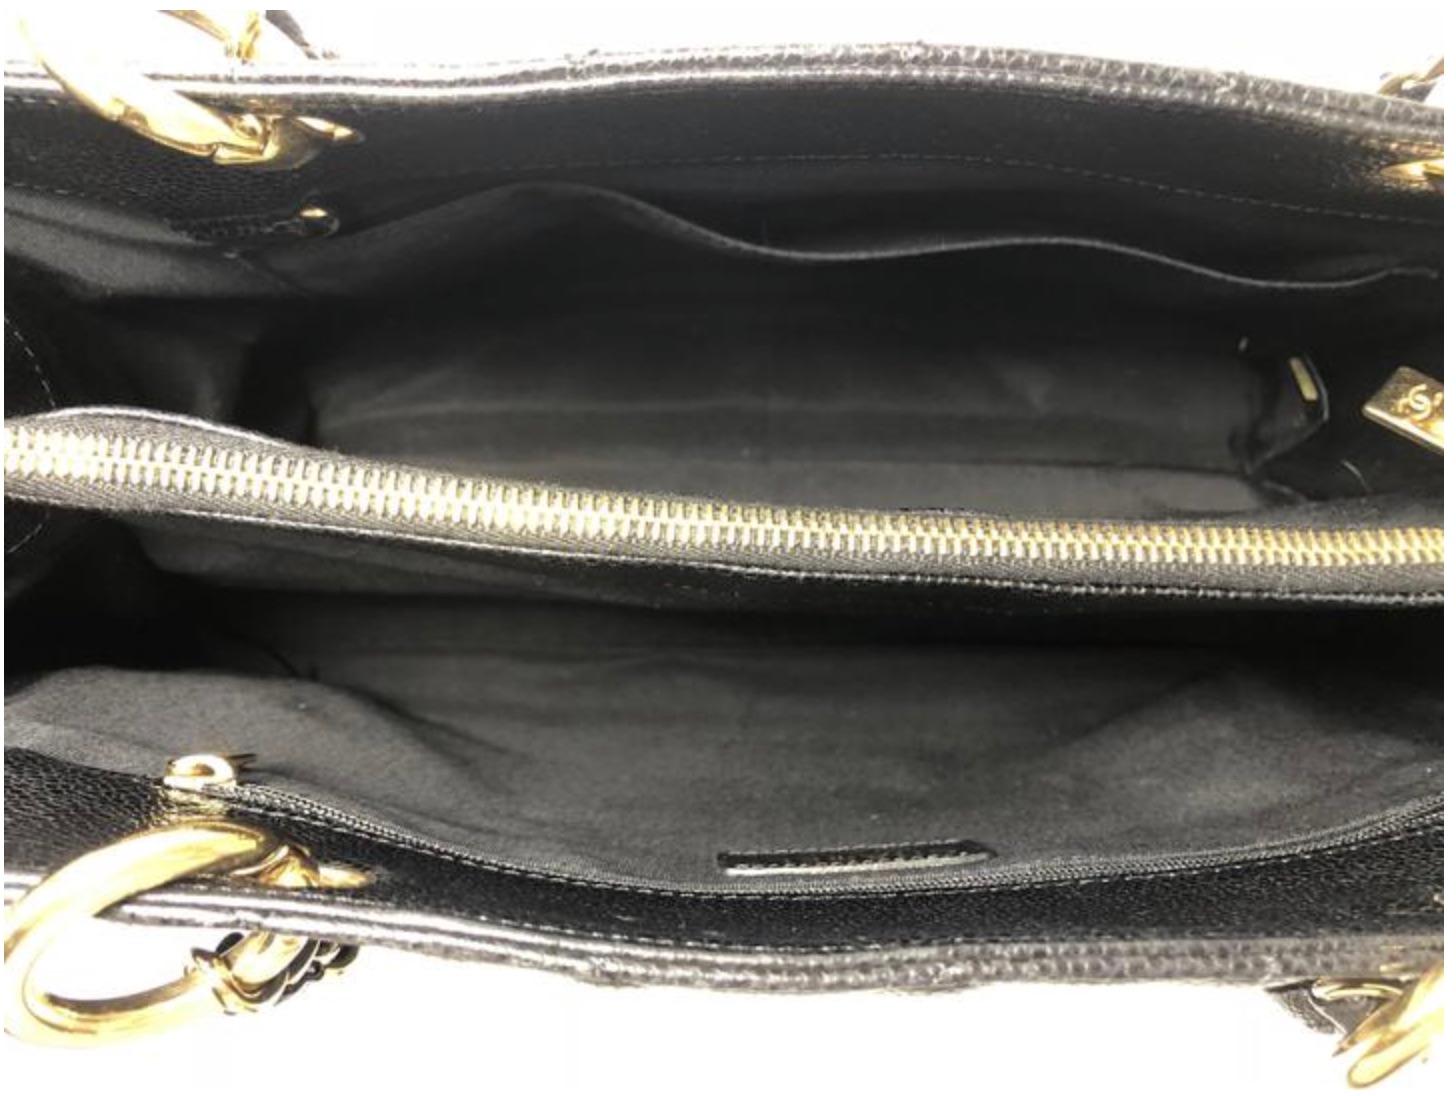 Chanel Caviar Leather Grand Shopping Tote w Gold Hardware in Black Shoulder Bag For Sale 5